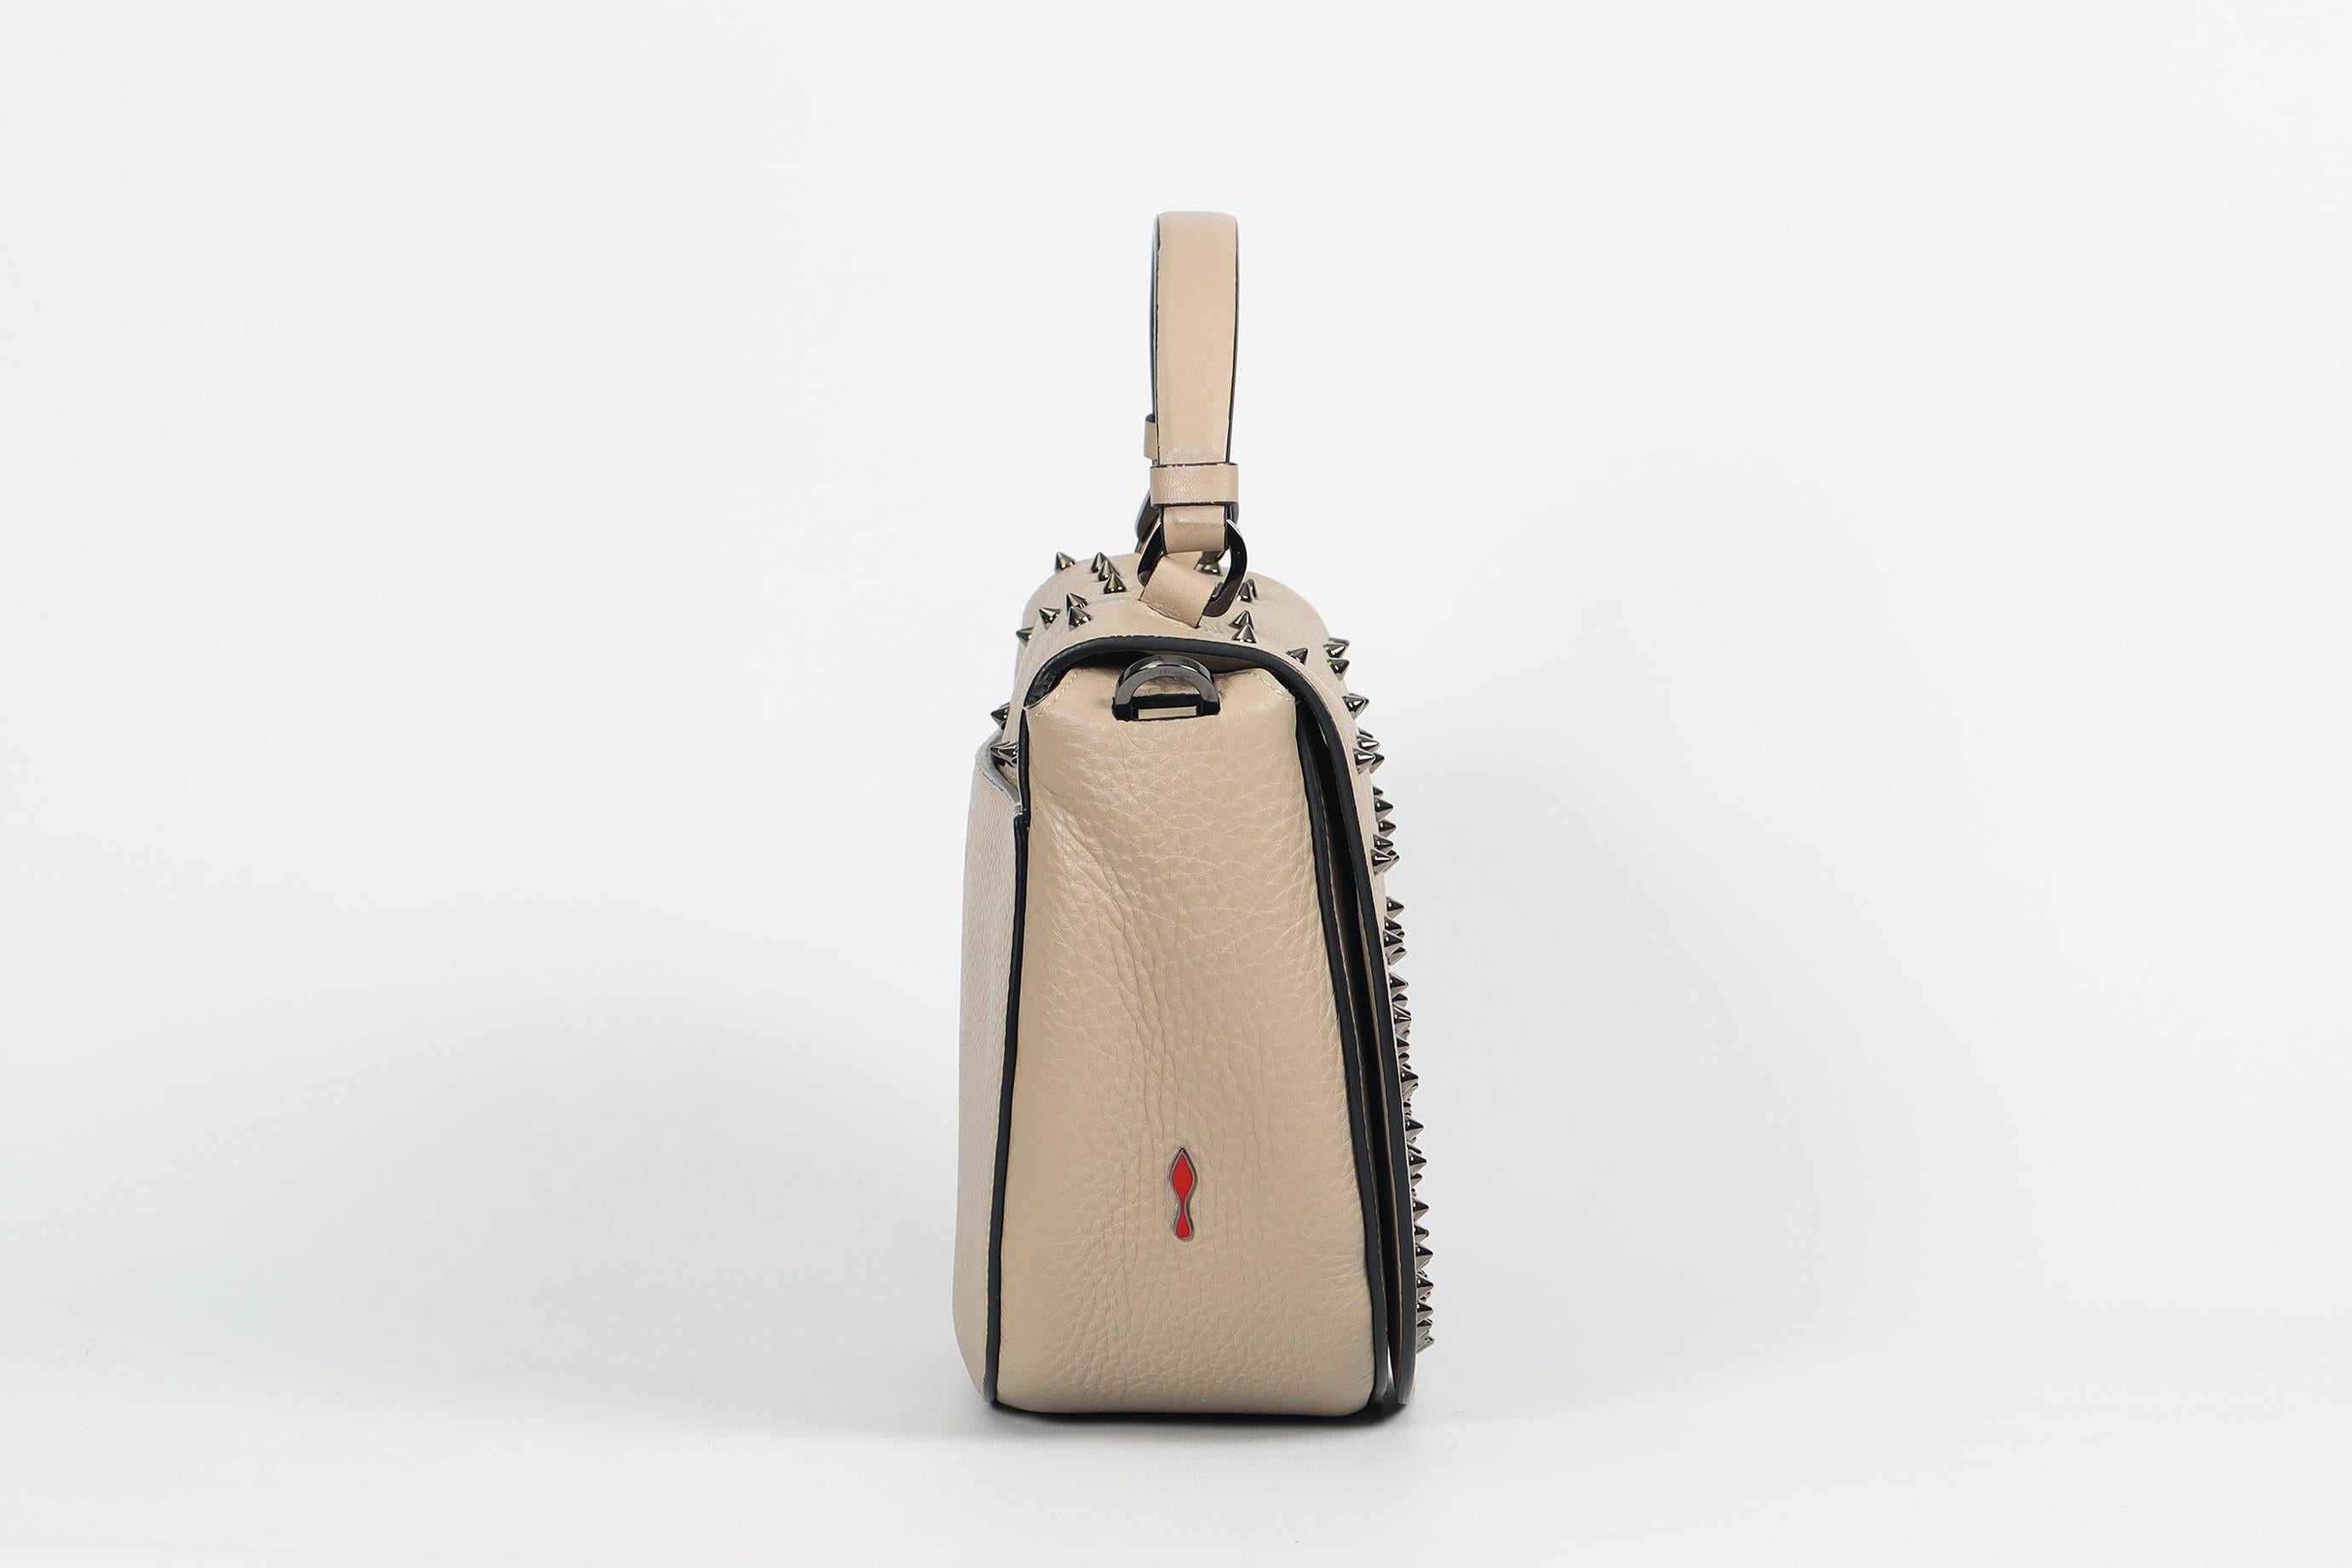 Christian Louboutin Panettone Spiked Leather Shoulder Bag In New Condition For Sale In London, GB